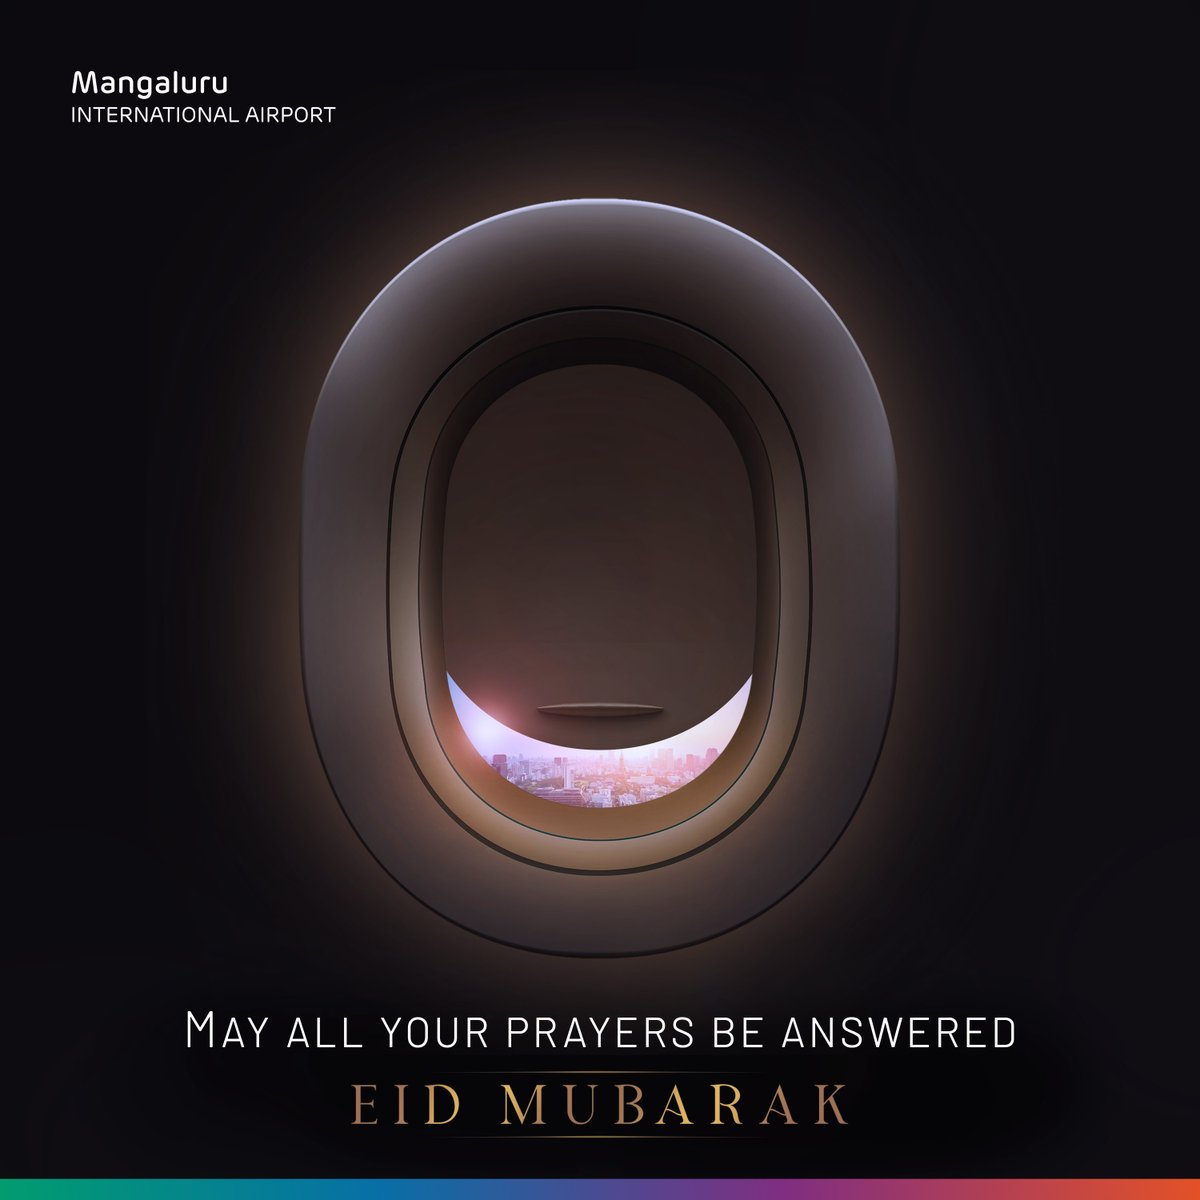 Sending warm wishes and heartfelt greetings on the auspicious occasion of Eid. May this day bring endless happiness and success to you and your family. #MangaluruAirport #GatewayToGoodness #EidMubarak #Eid2024 #EidAlFitr #Celebrations #Joy #Airports #Aviation